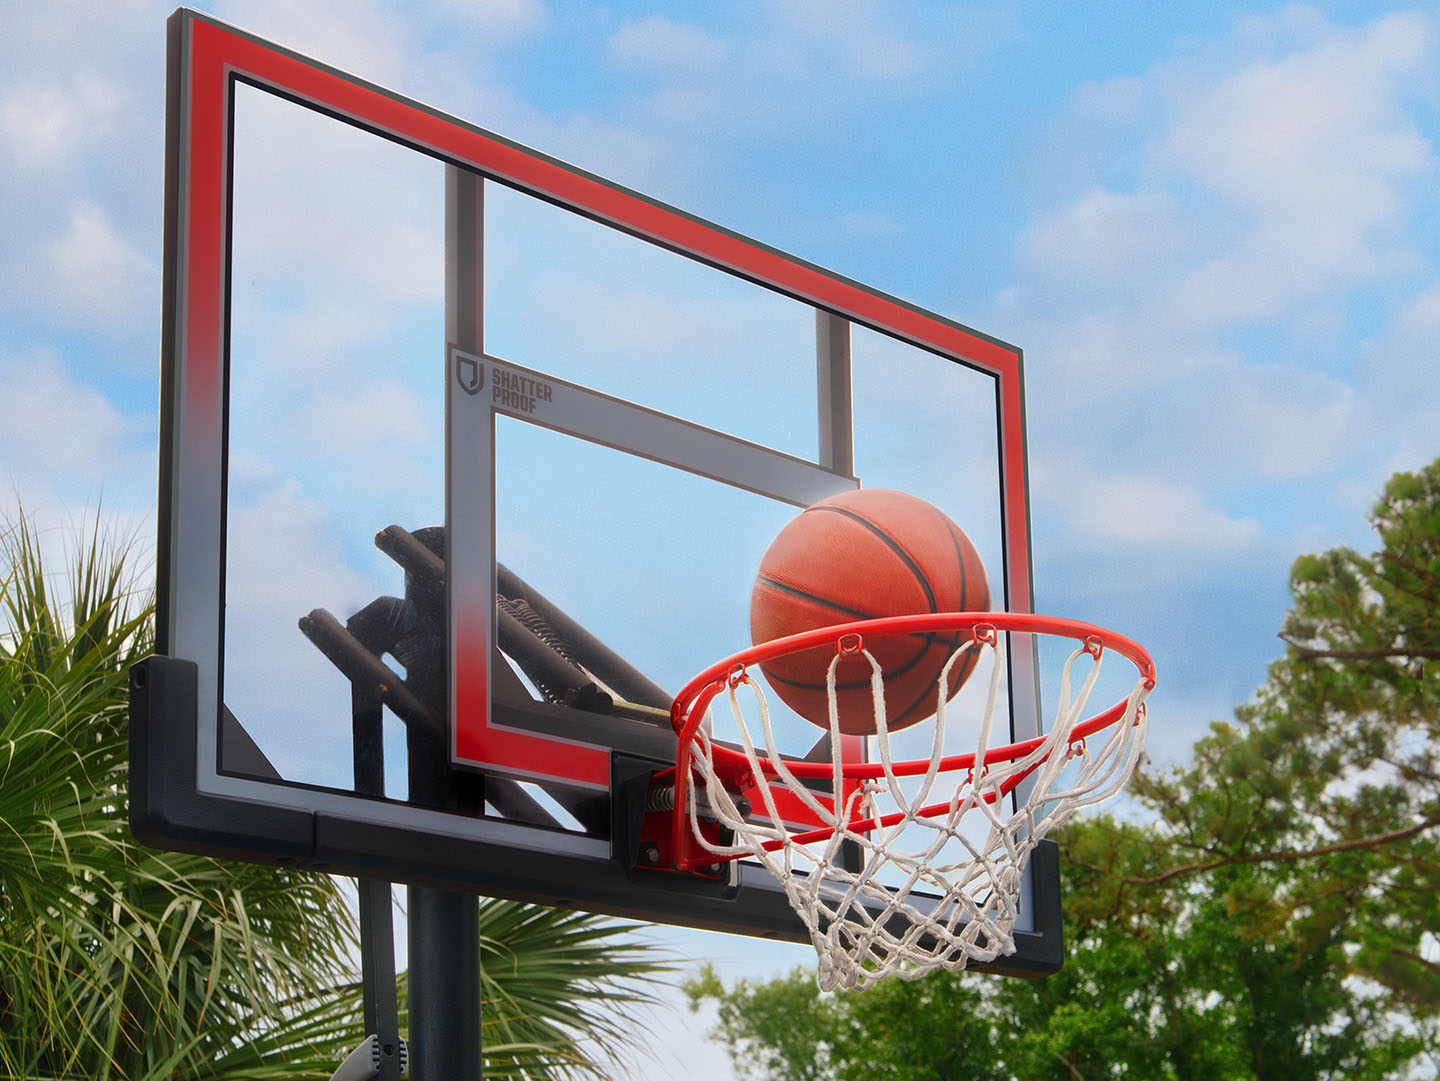 Marriott's Harbour Point Basketball. Marriott's Harbour Point is located in Hilton Head Island, South Carolina United States.